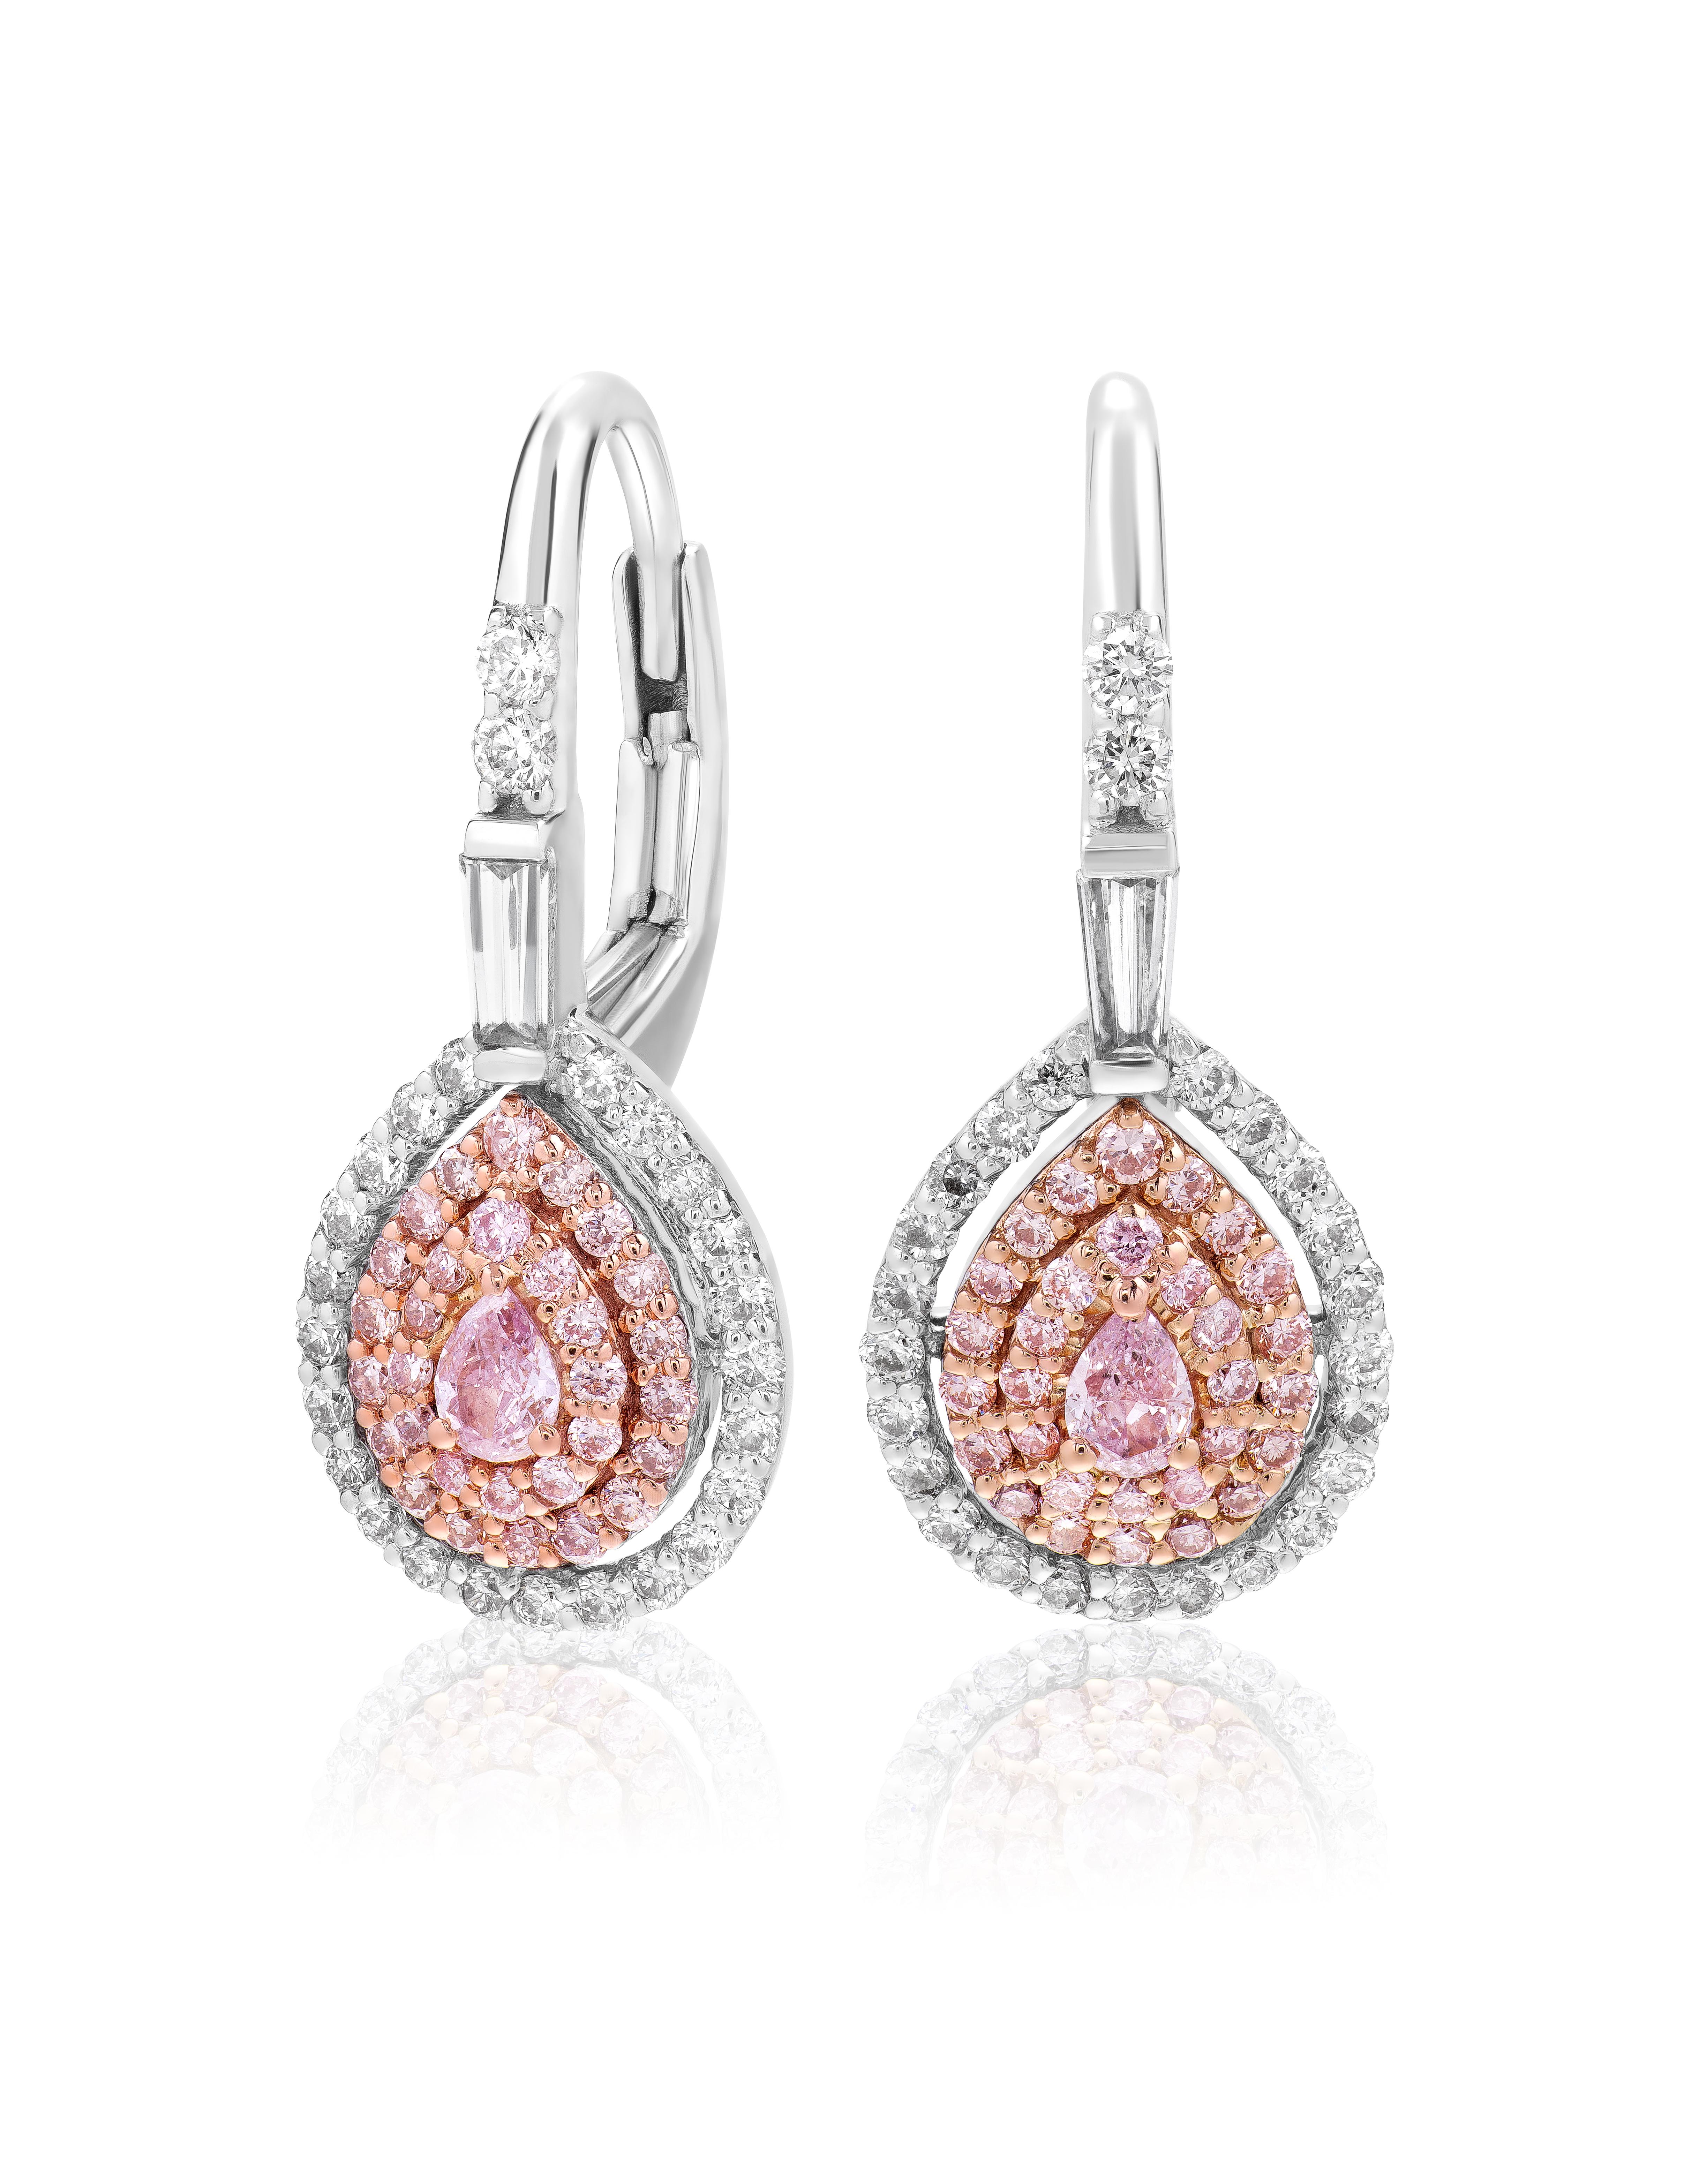 These stunning fancy pink earrings are the perfect accessory to add a pop of color to any outfit. The lever back design ensures a secure and comfortable fit, while the 0.17 carat fancy pink center stones are accented by a total of 110 diamonds in